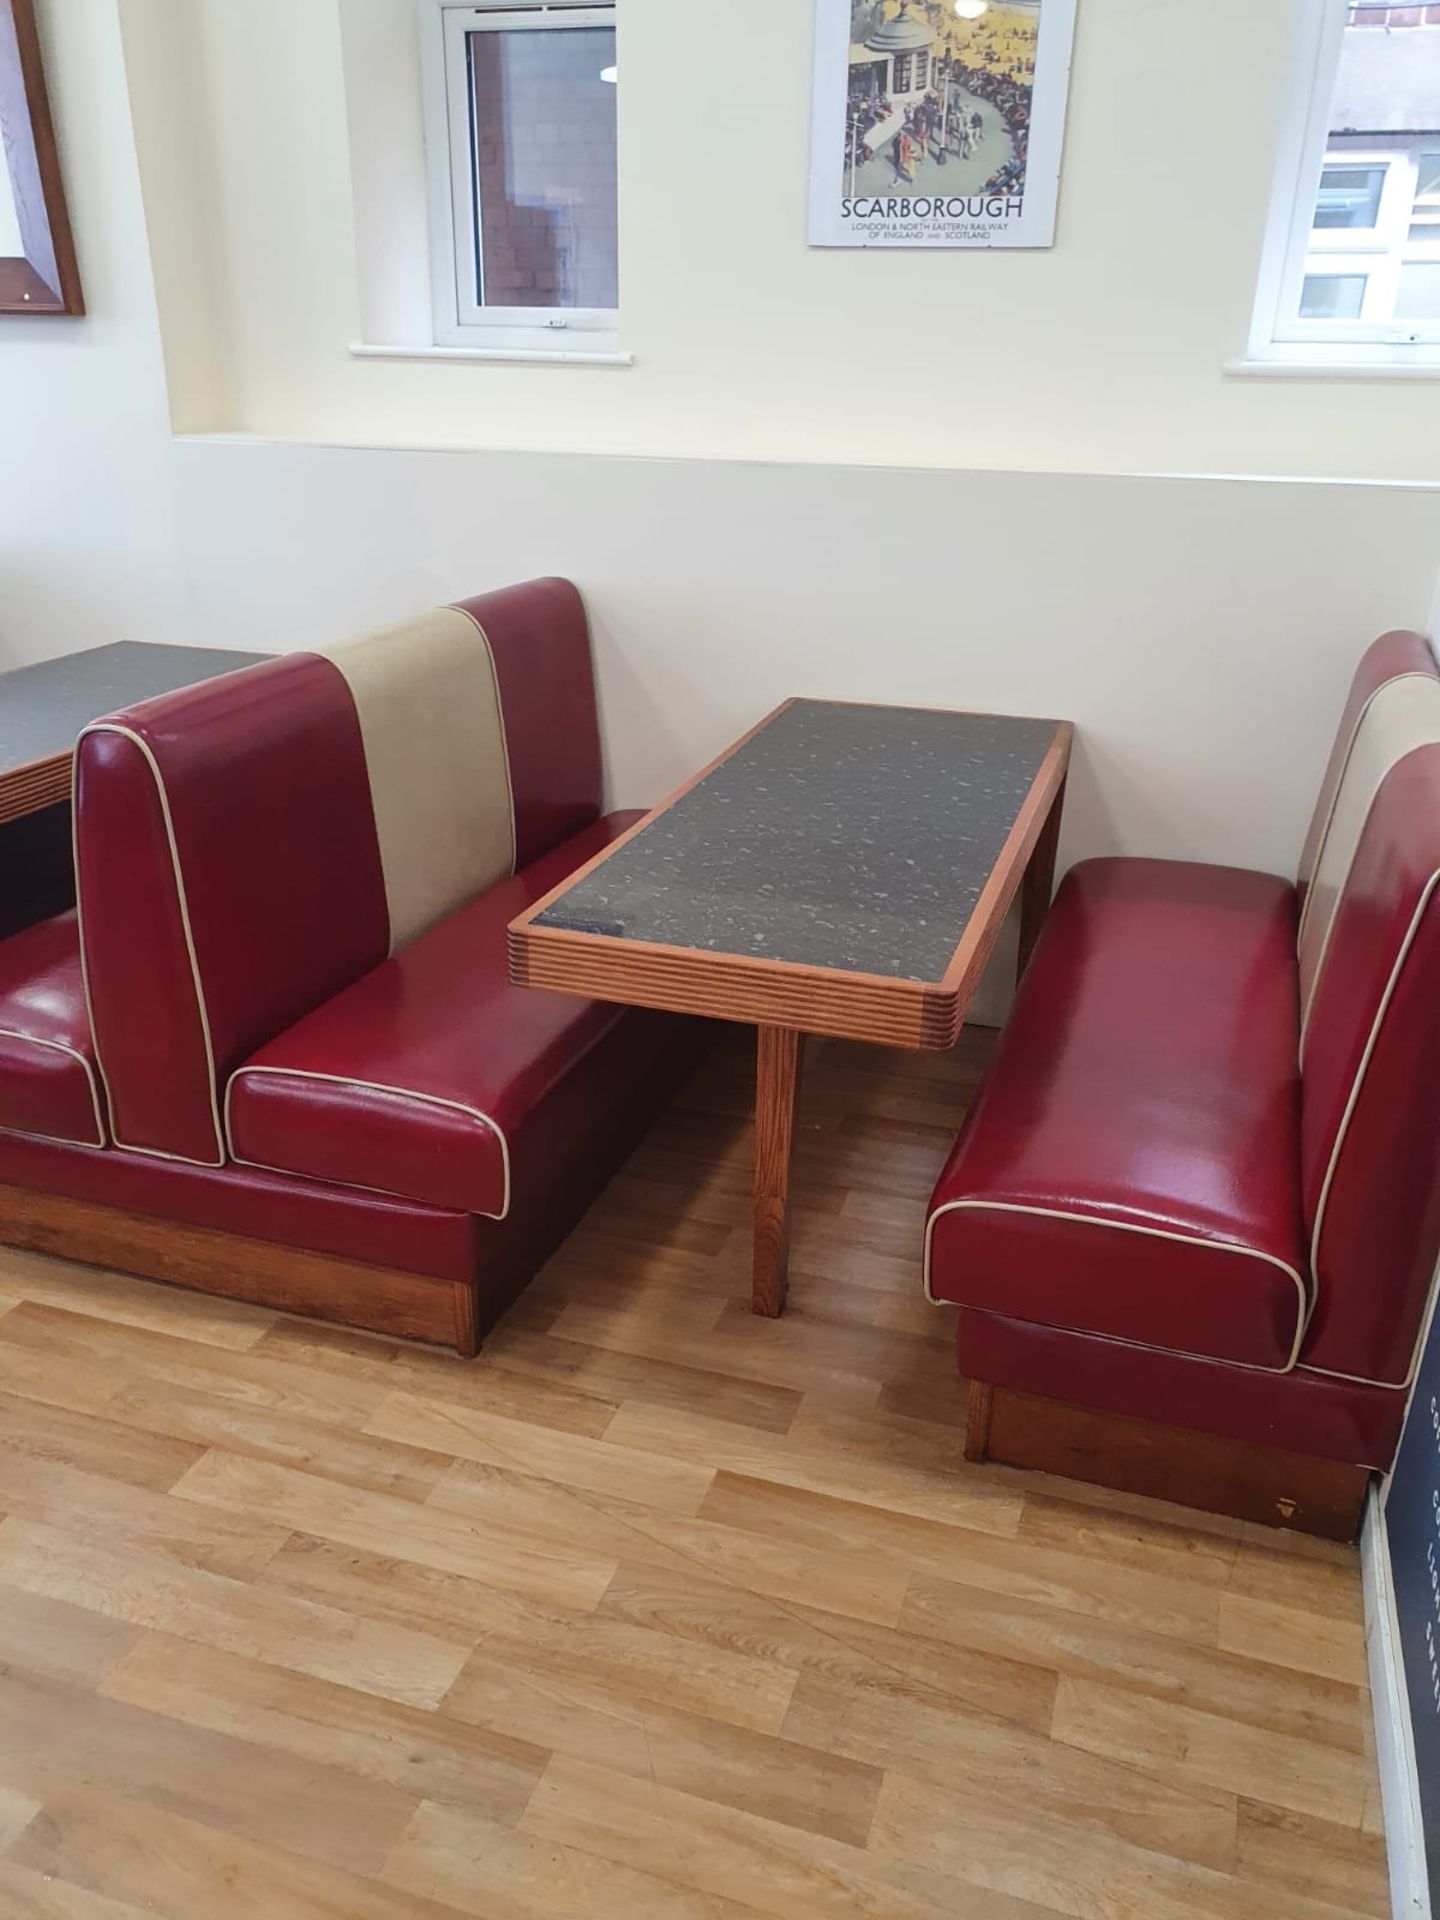 CAFE FURNITURE, CORNER BOOTH, BACK TO BACK SEATING, TABLES AND CHAIRS *NO VAT* - Image 6 of 7